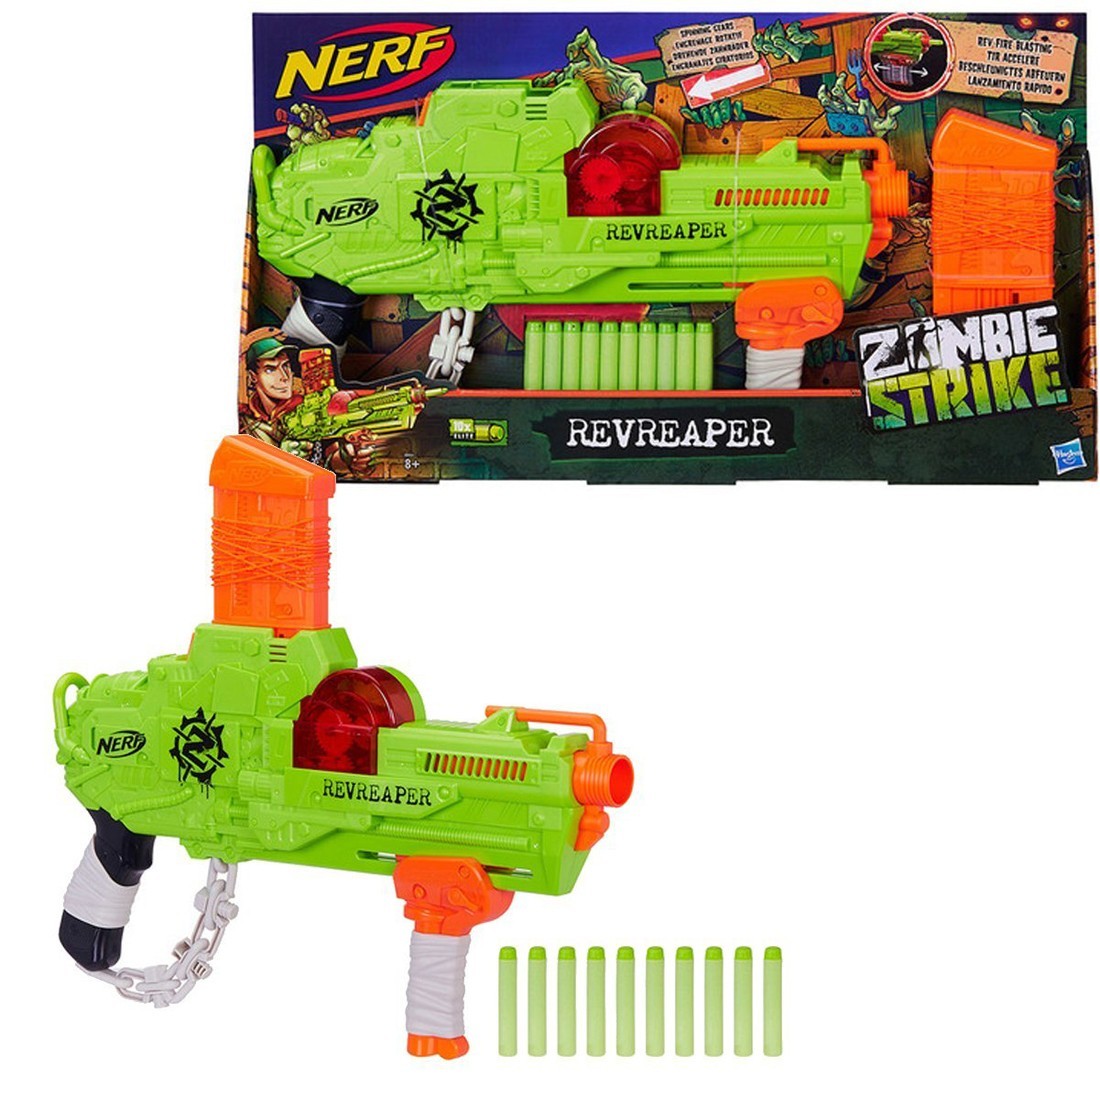 Buy Nerf Zombie Strike Revreaper Toy - Nerf, delivered to your home |  TheOutfit